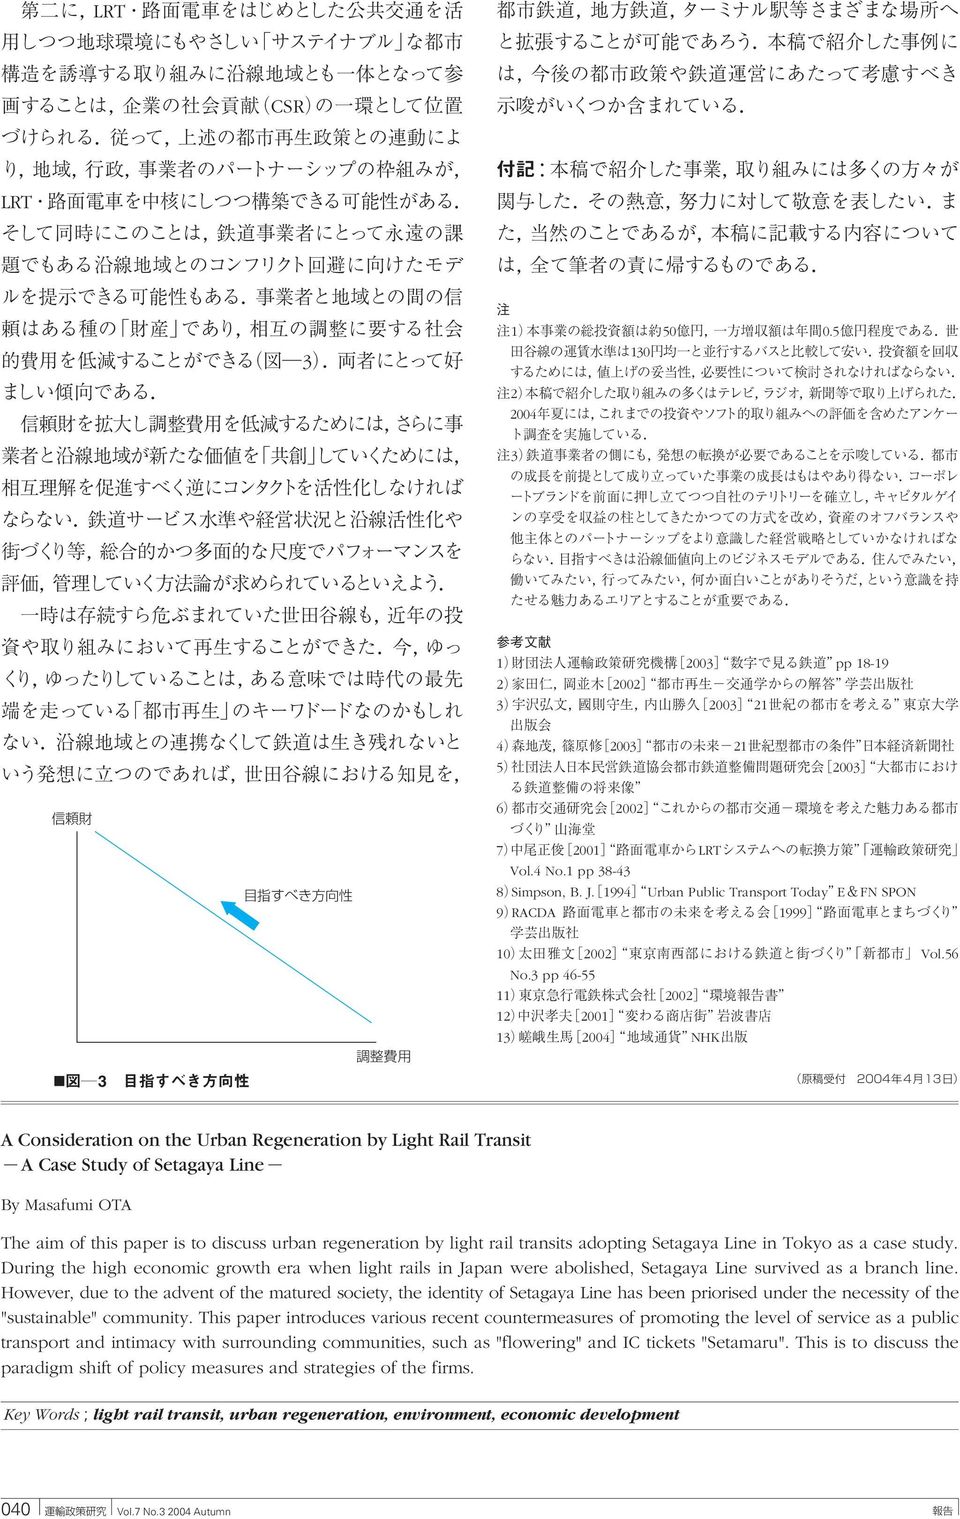 3 pp 46-55 11 2002 12 2001 13 2004 NHK A Consideration on the Urban Regeneration by Light Rail Transit A Case Study of Setagaya Line By Masafumi OTA The aim of this paper is to discuss urban